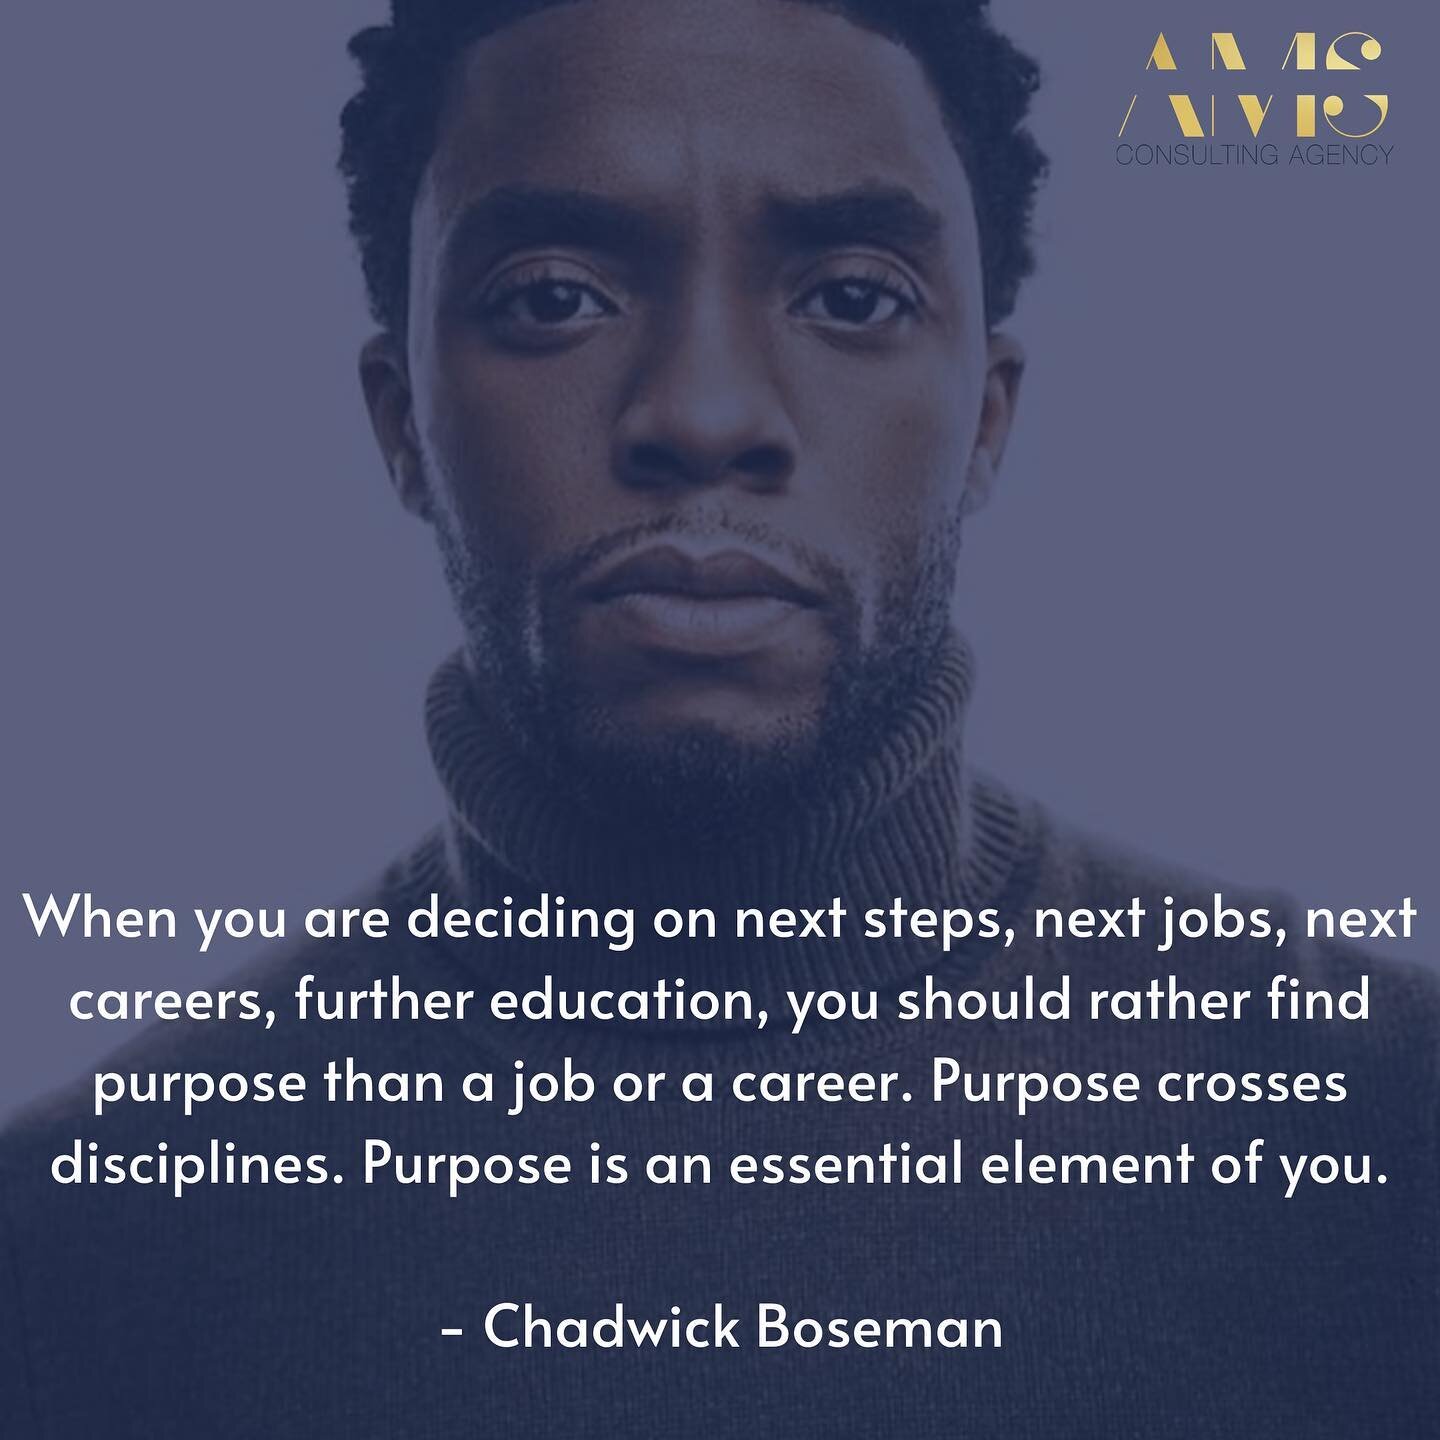 Find your purpose and let it lead the way. 🙏🏽 Rest peacefully.